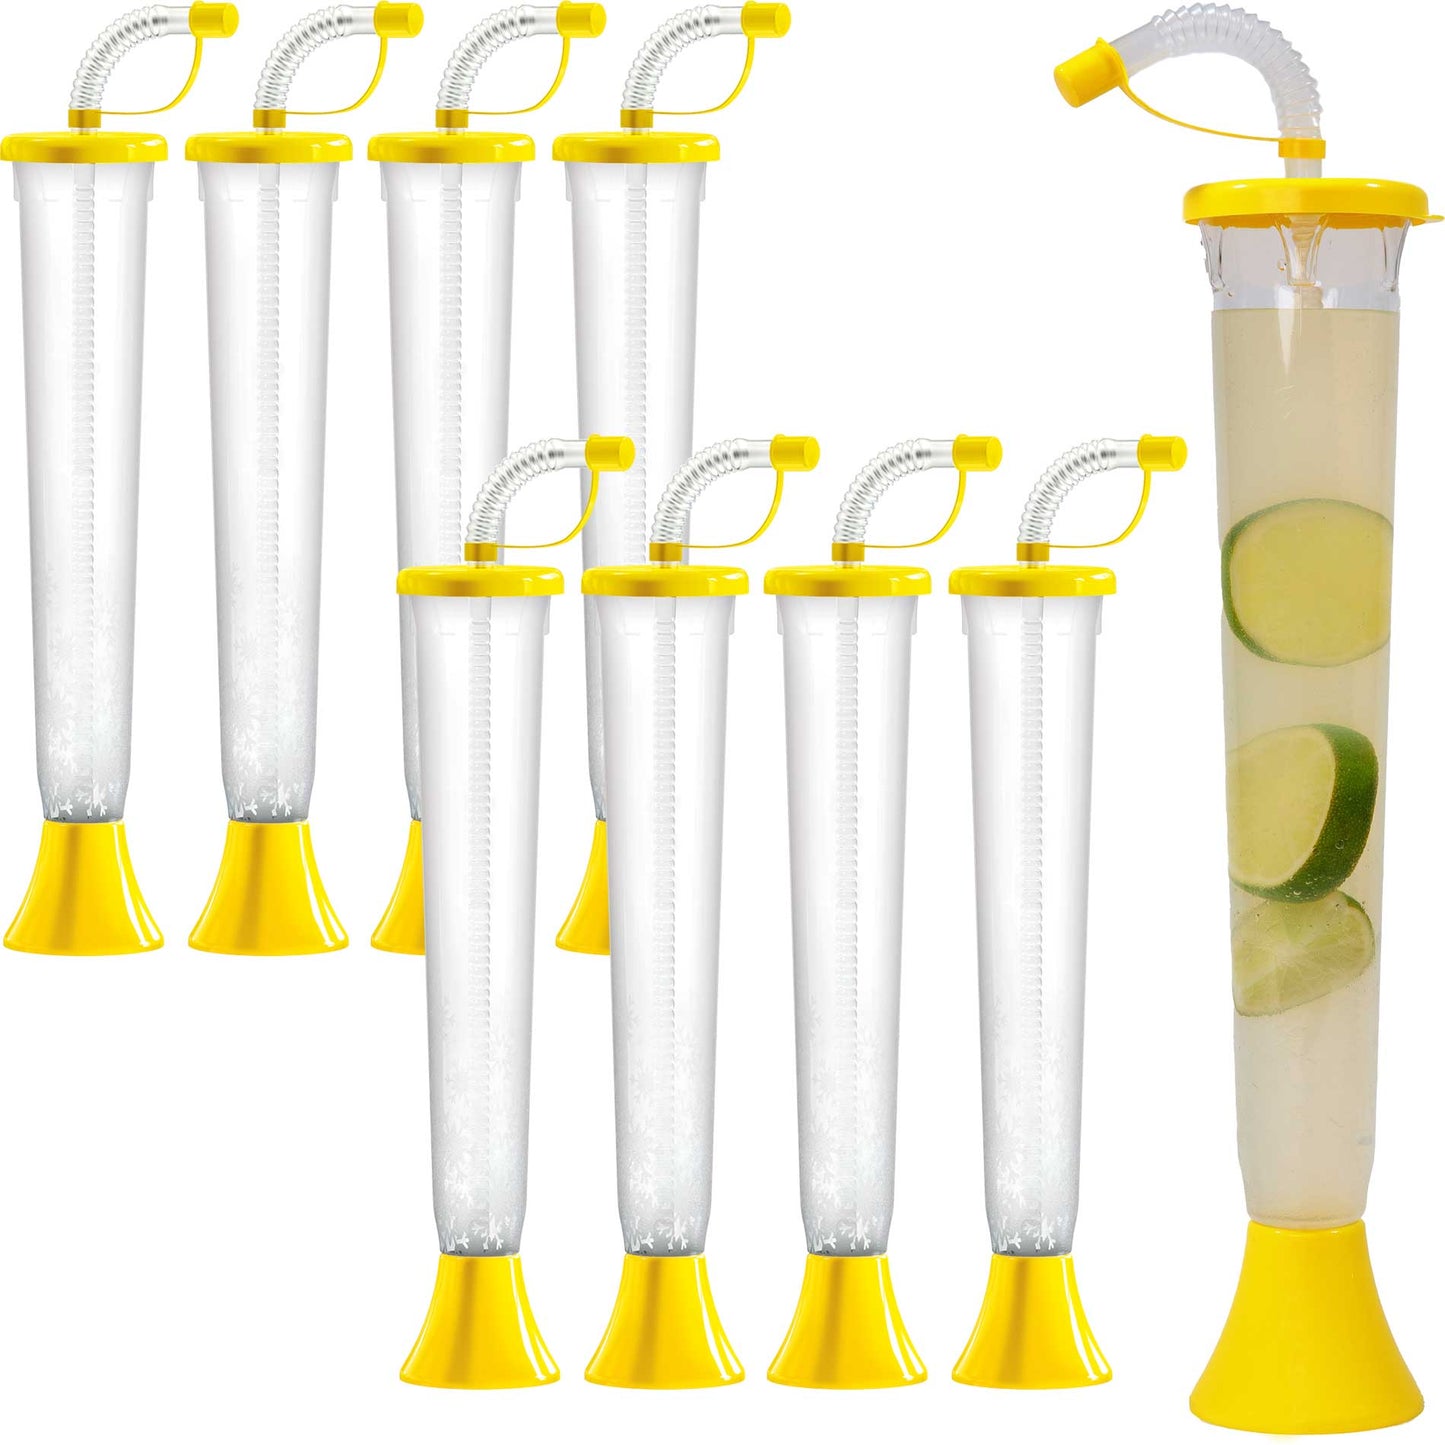 Sweet World USA Yard Cups (54 or 108 Cups) Yard Cups with YELLOW Lids and Straws - 14oz - for Margaritas and Frozen Drinks cups with lids and straws